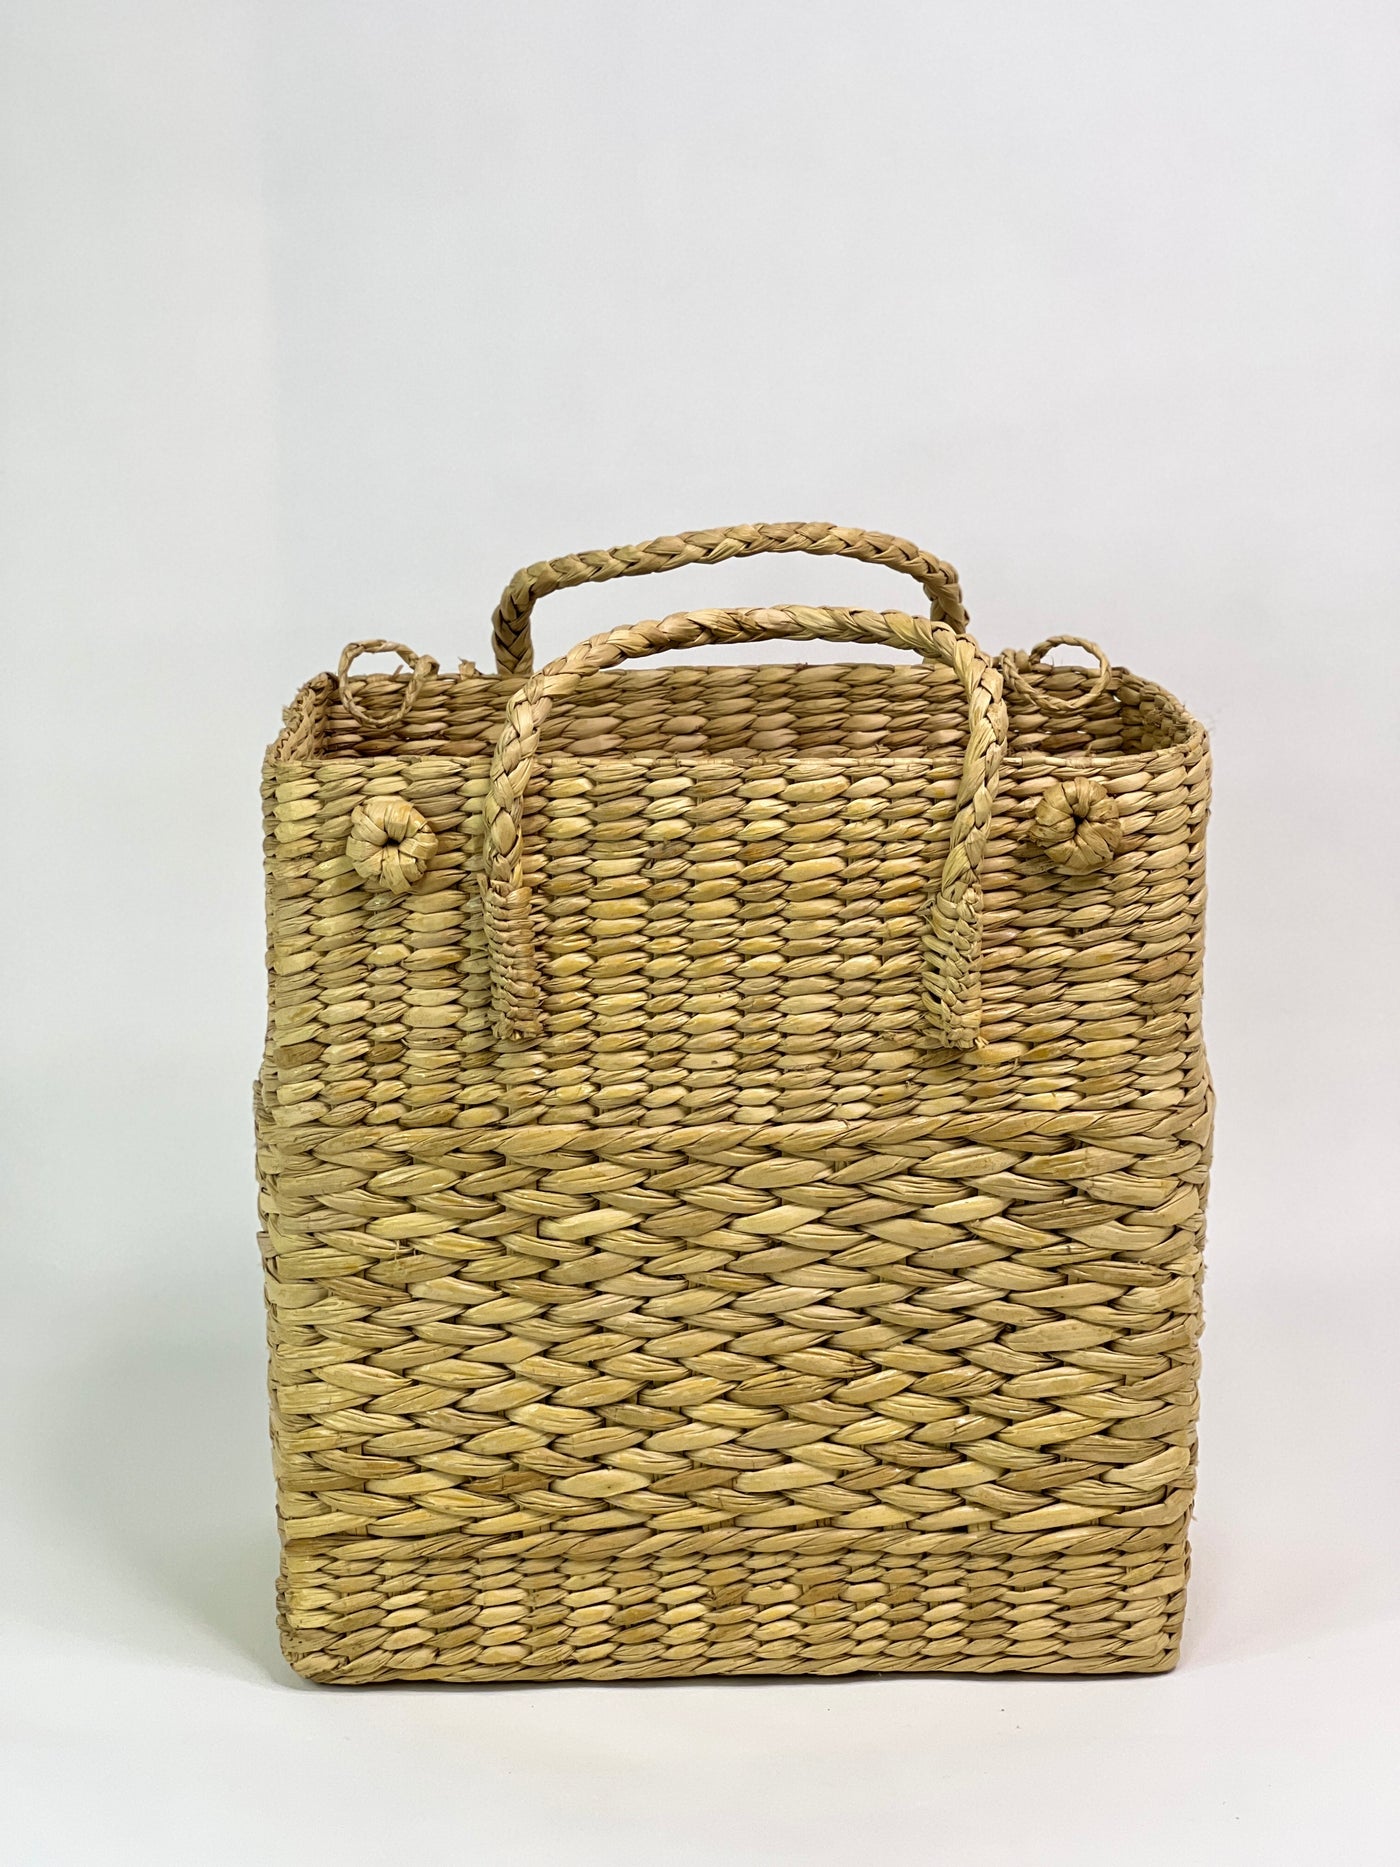 Tredy Foods - Handmade Kauna Grass Bag: The Kauna is basically long tender  Grass that was cultivated extensively in the wetlands of Imphal.⁠ It is a  new arrival.⁠ ⁠https://www.tredyfoods.com/products/handmade-kauna-grass-bag⁠  ⁠ #tredy #tredyfoods #